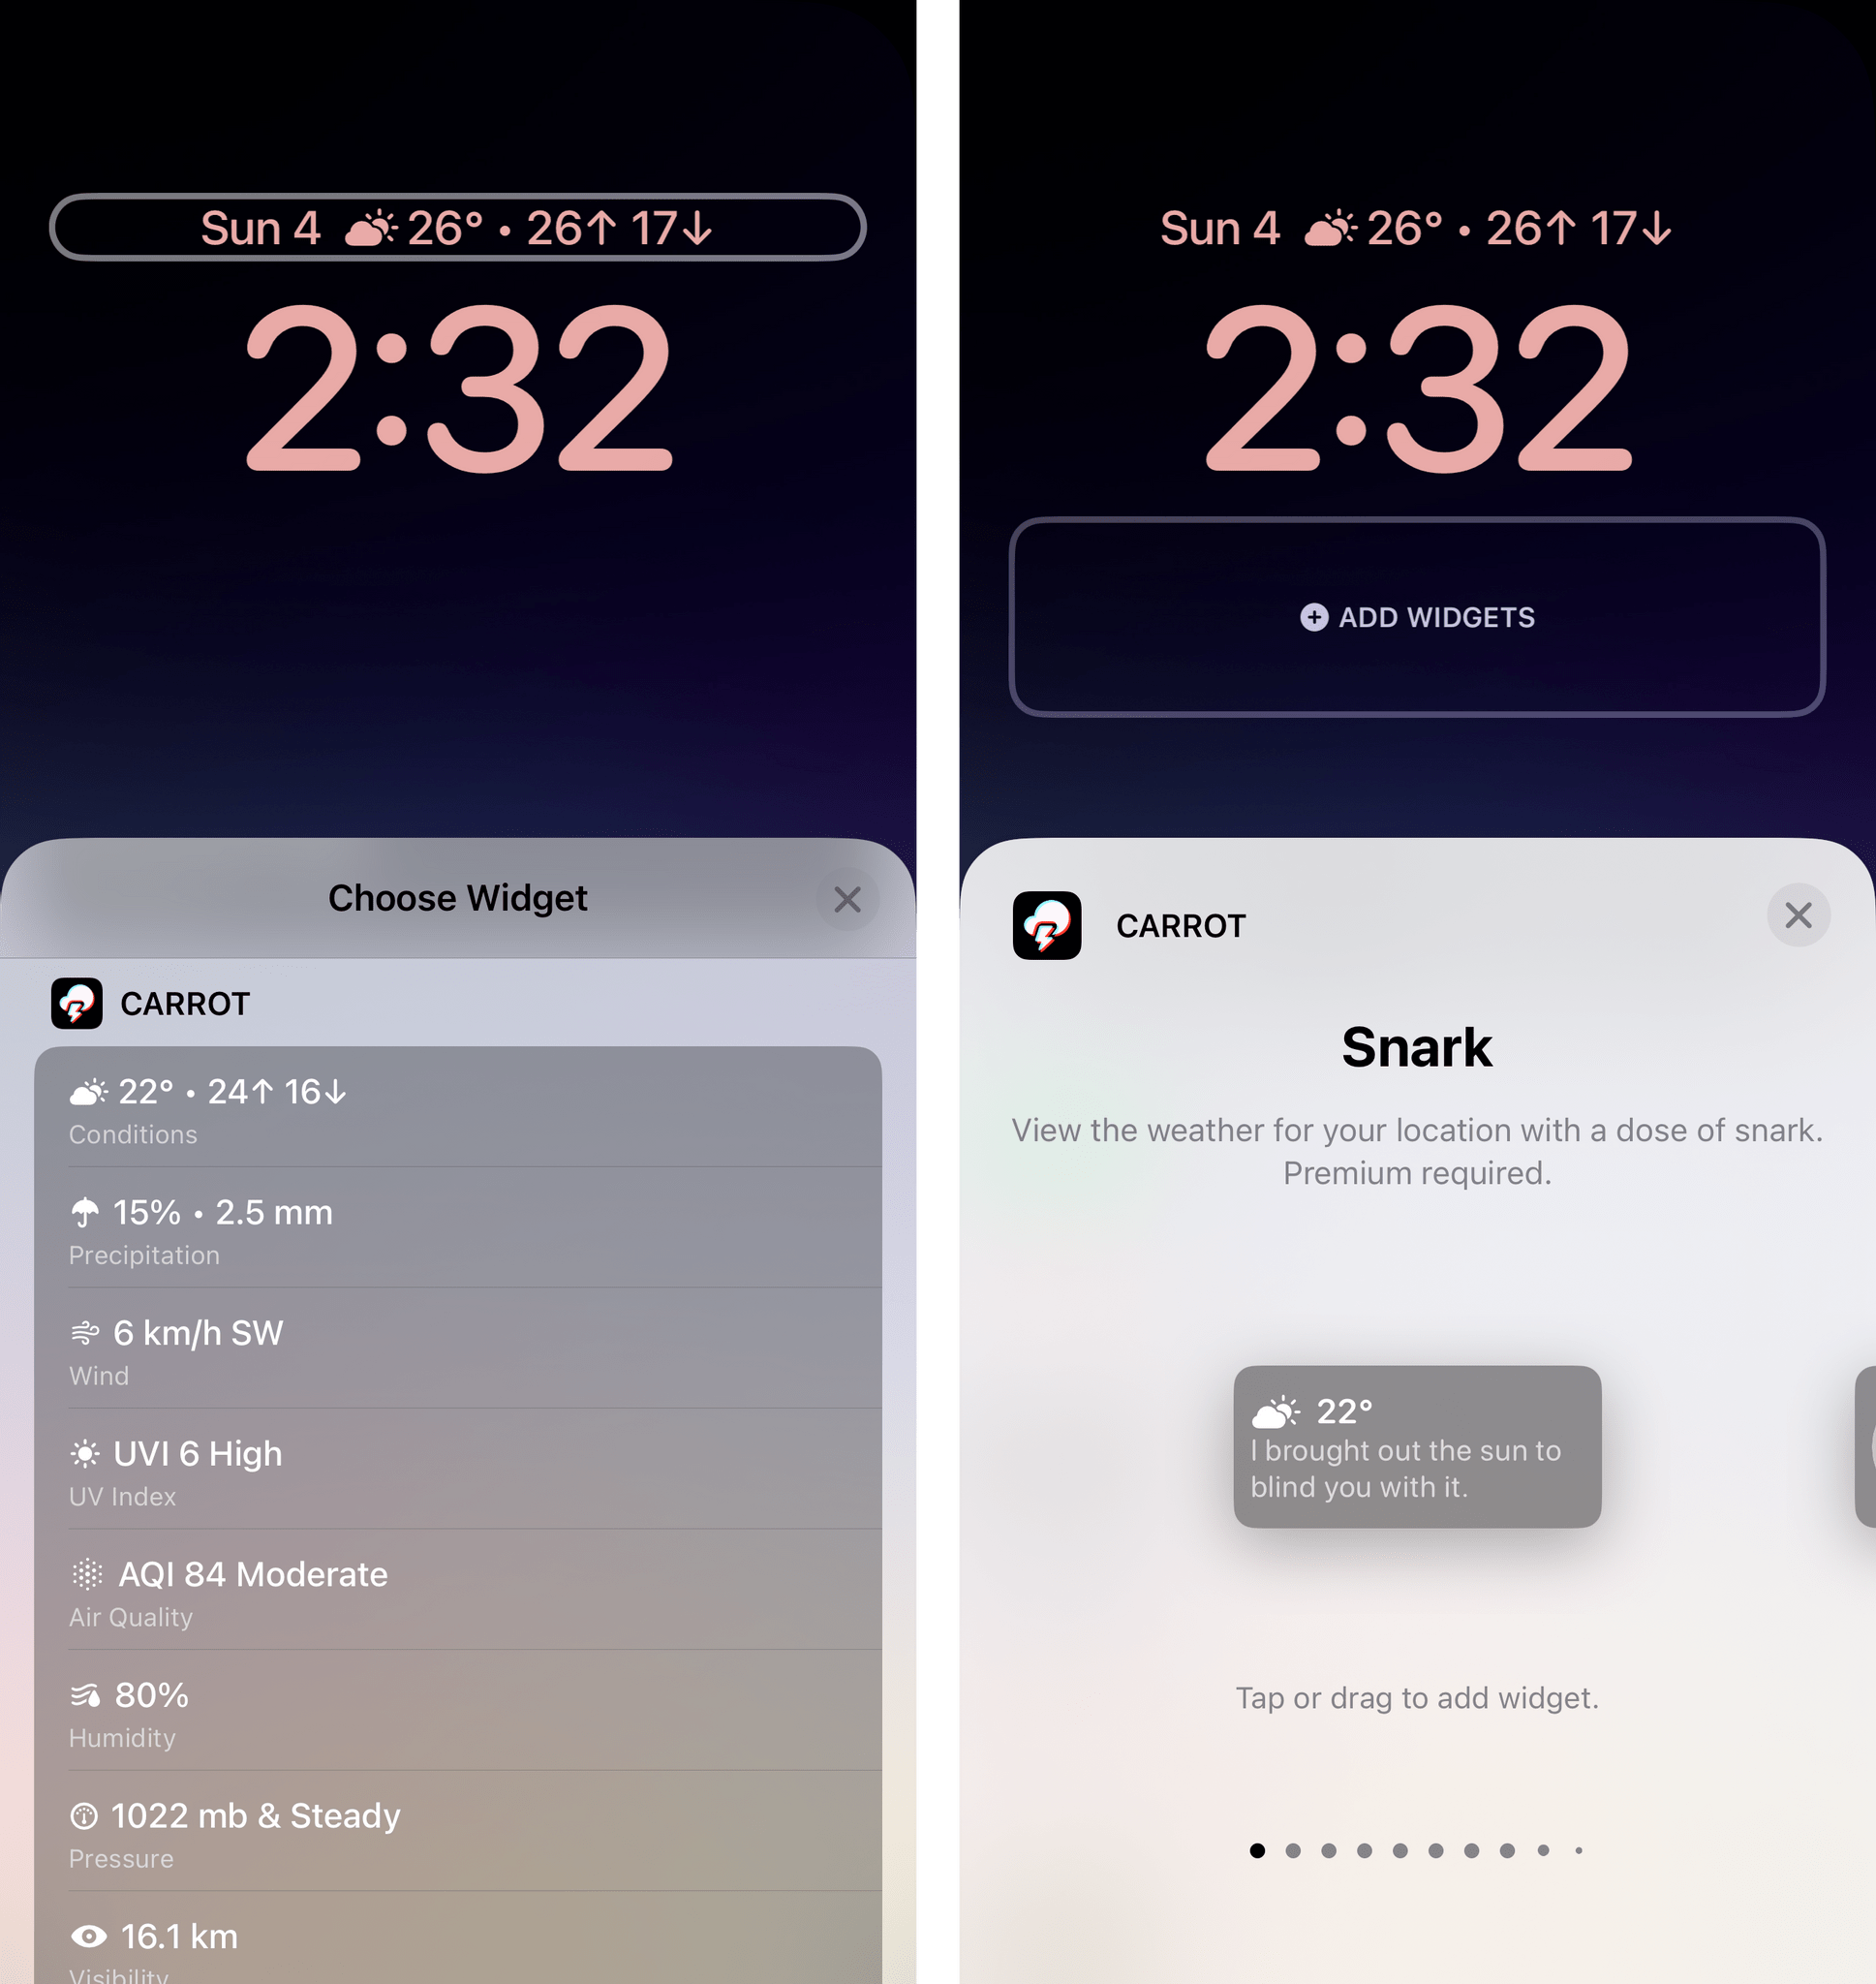 CARROT Weather has one of the richest Lock Screen integrations I've seen to date.